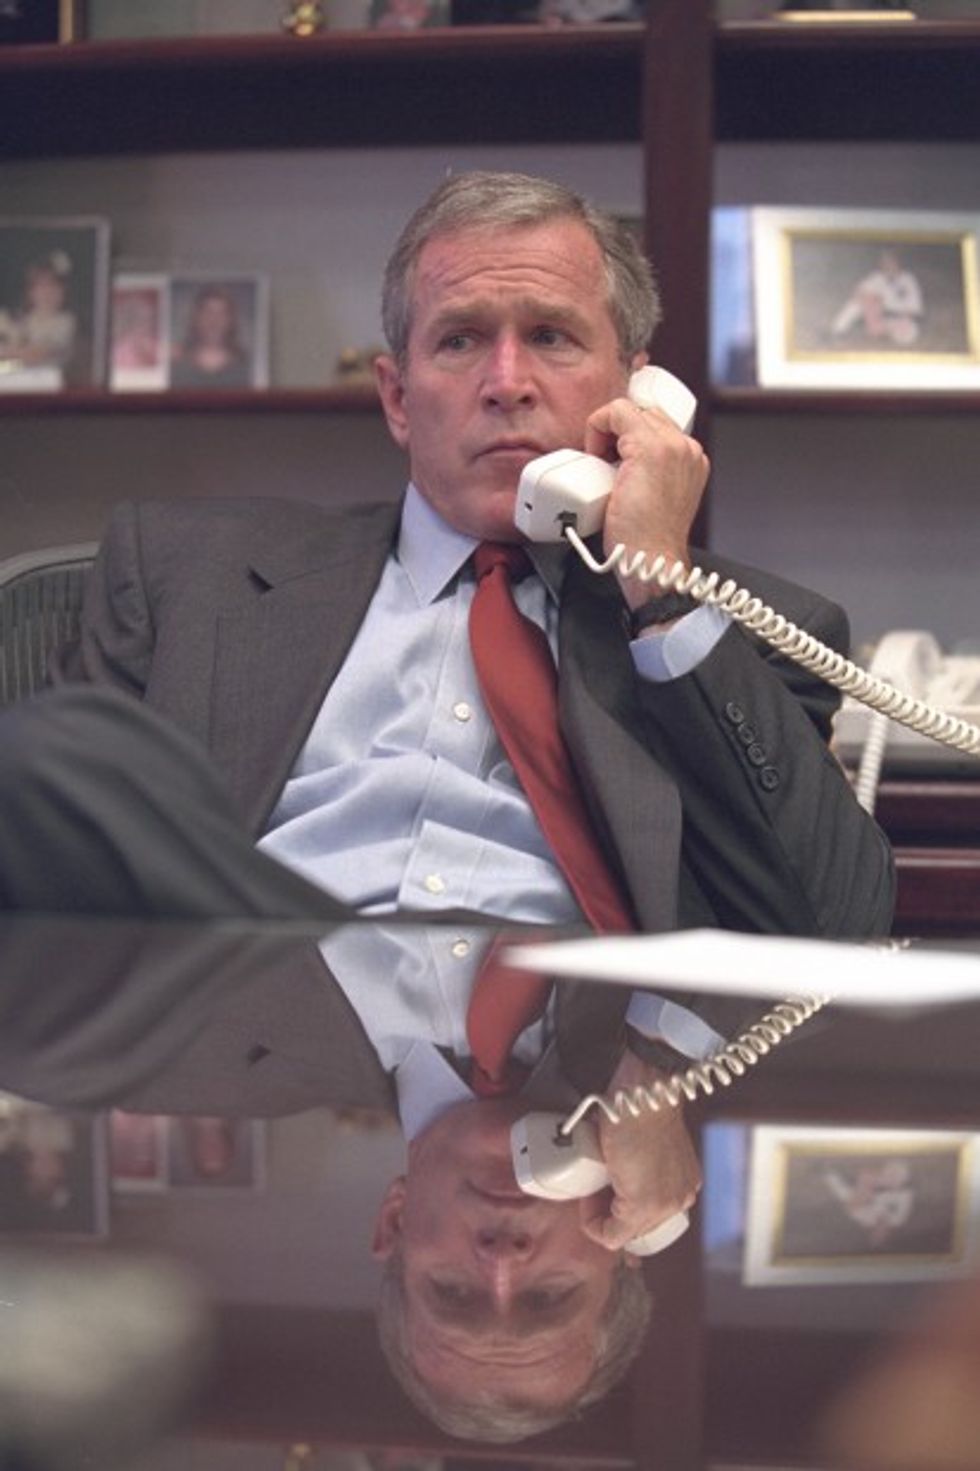 Never Before Seen Photos Show George W Bush In Aftermath